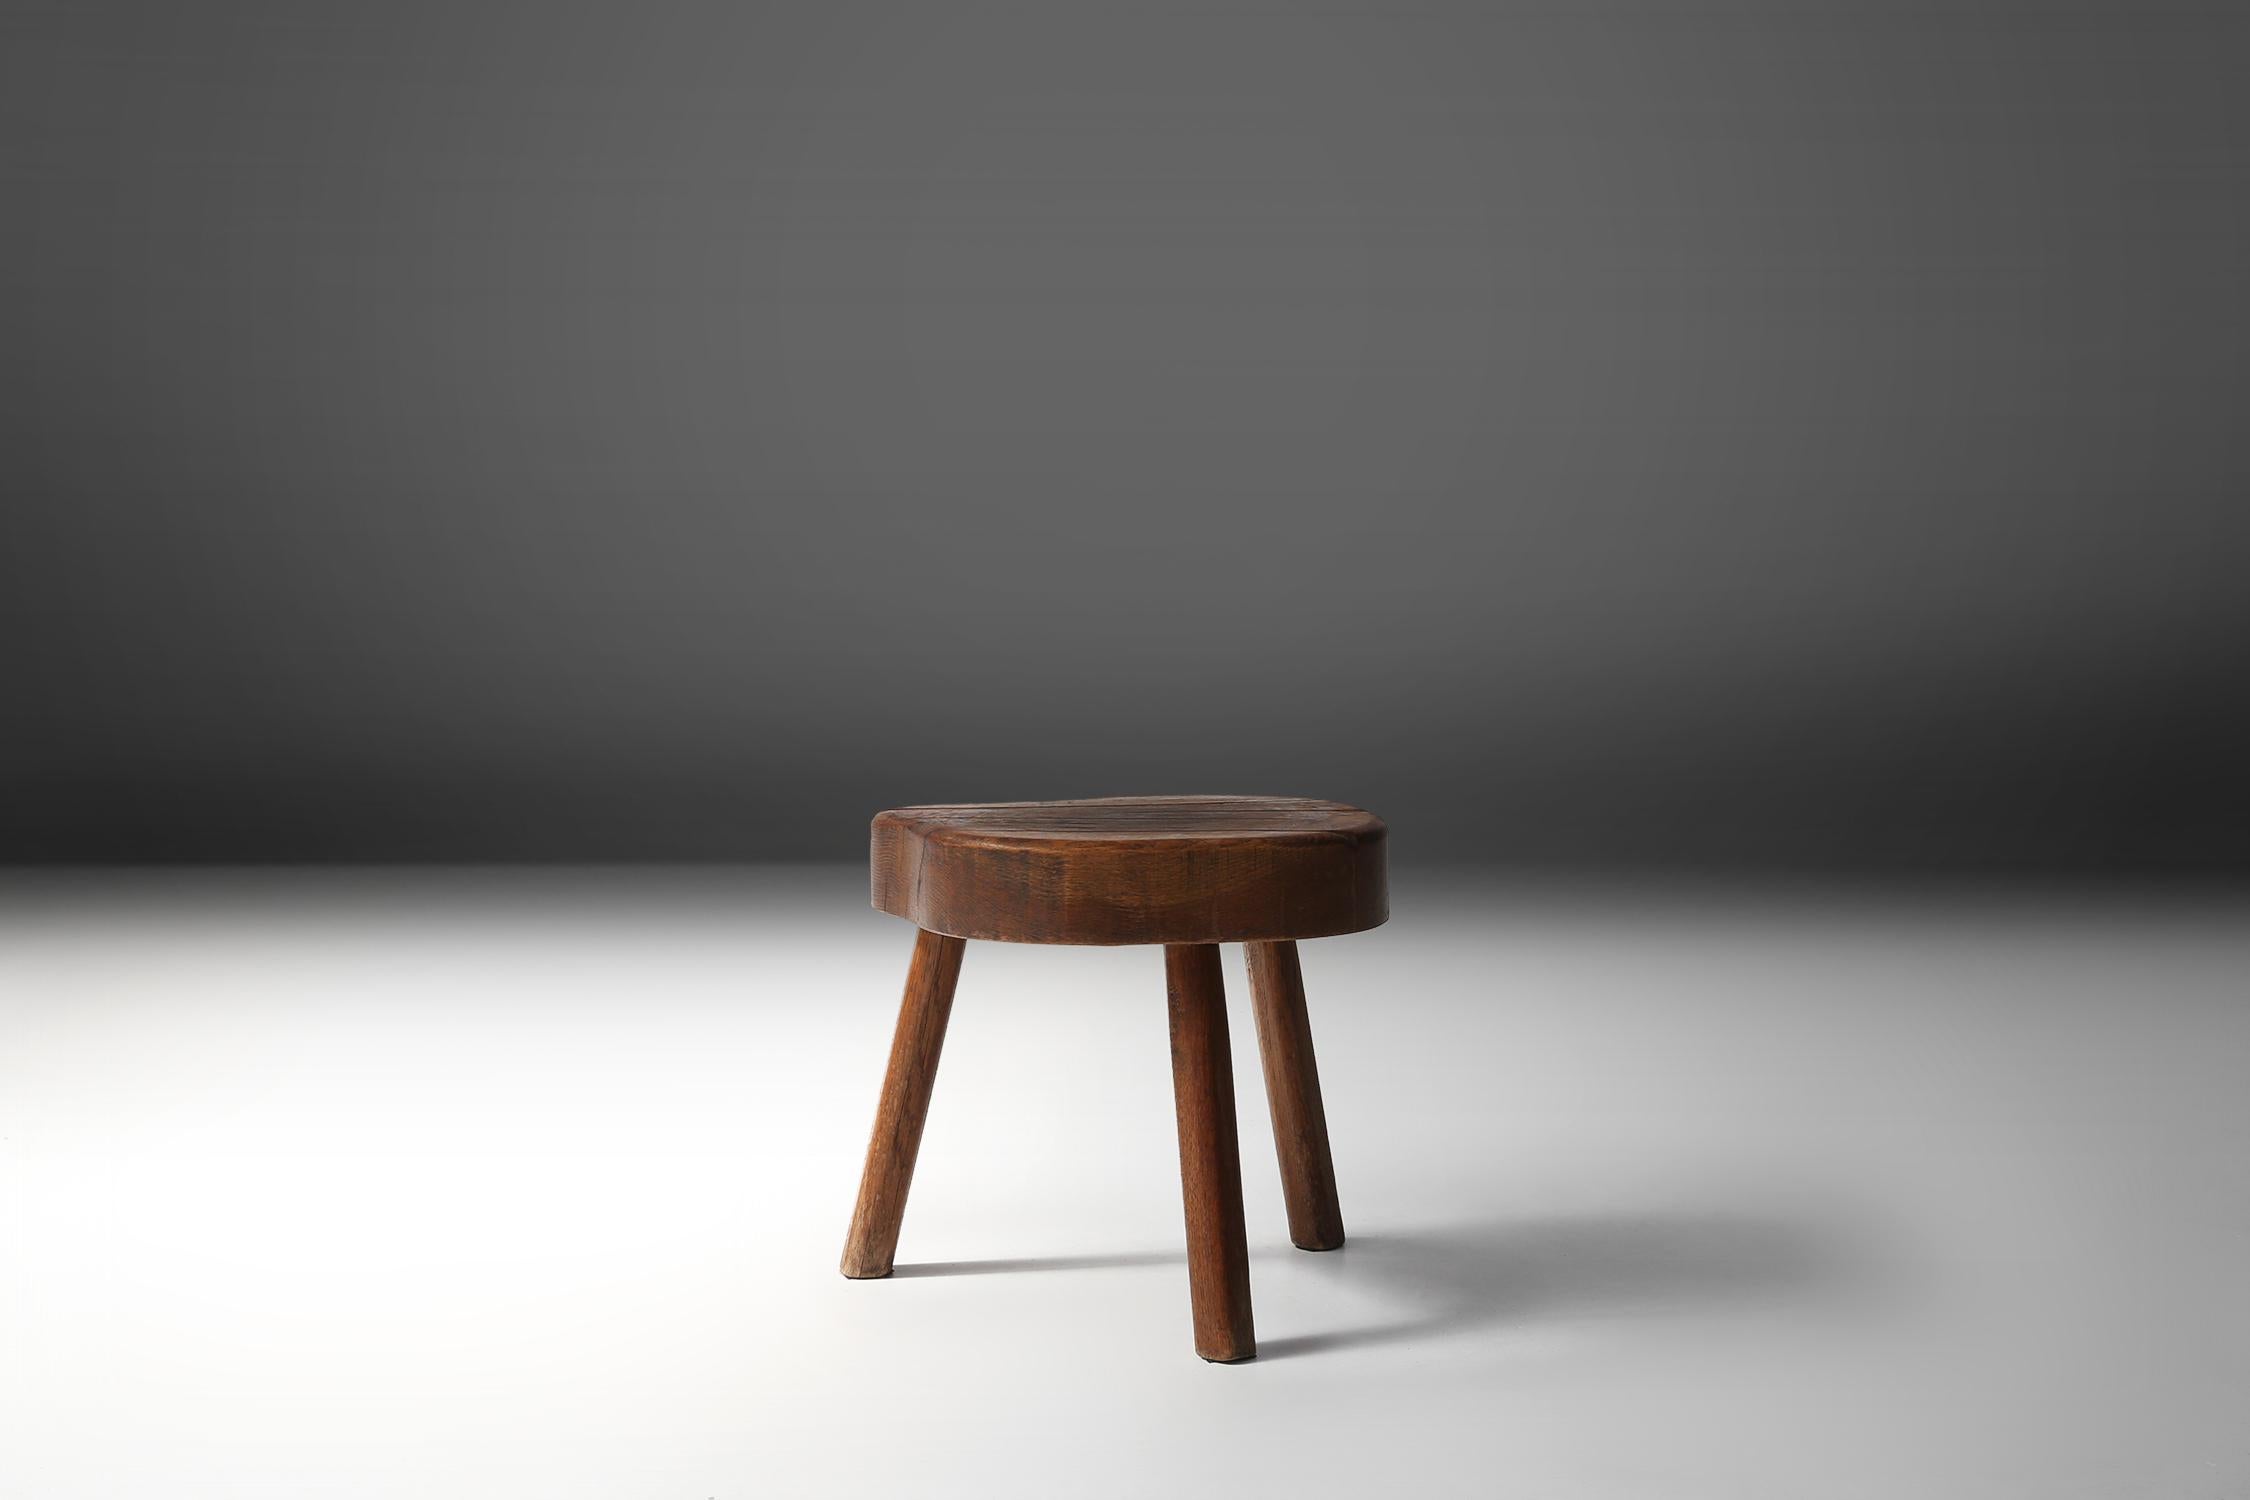 Small wooden stool made of a solid piece of tree.
Has a rustic and Wabi-Sabi look.